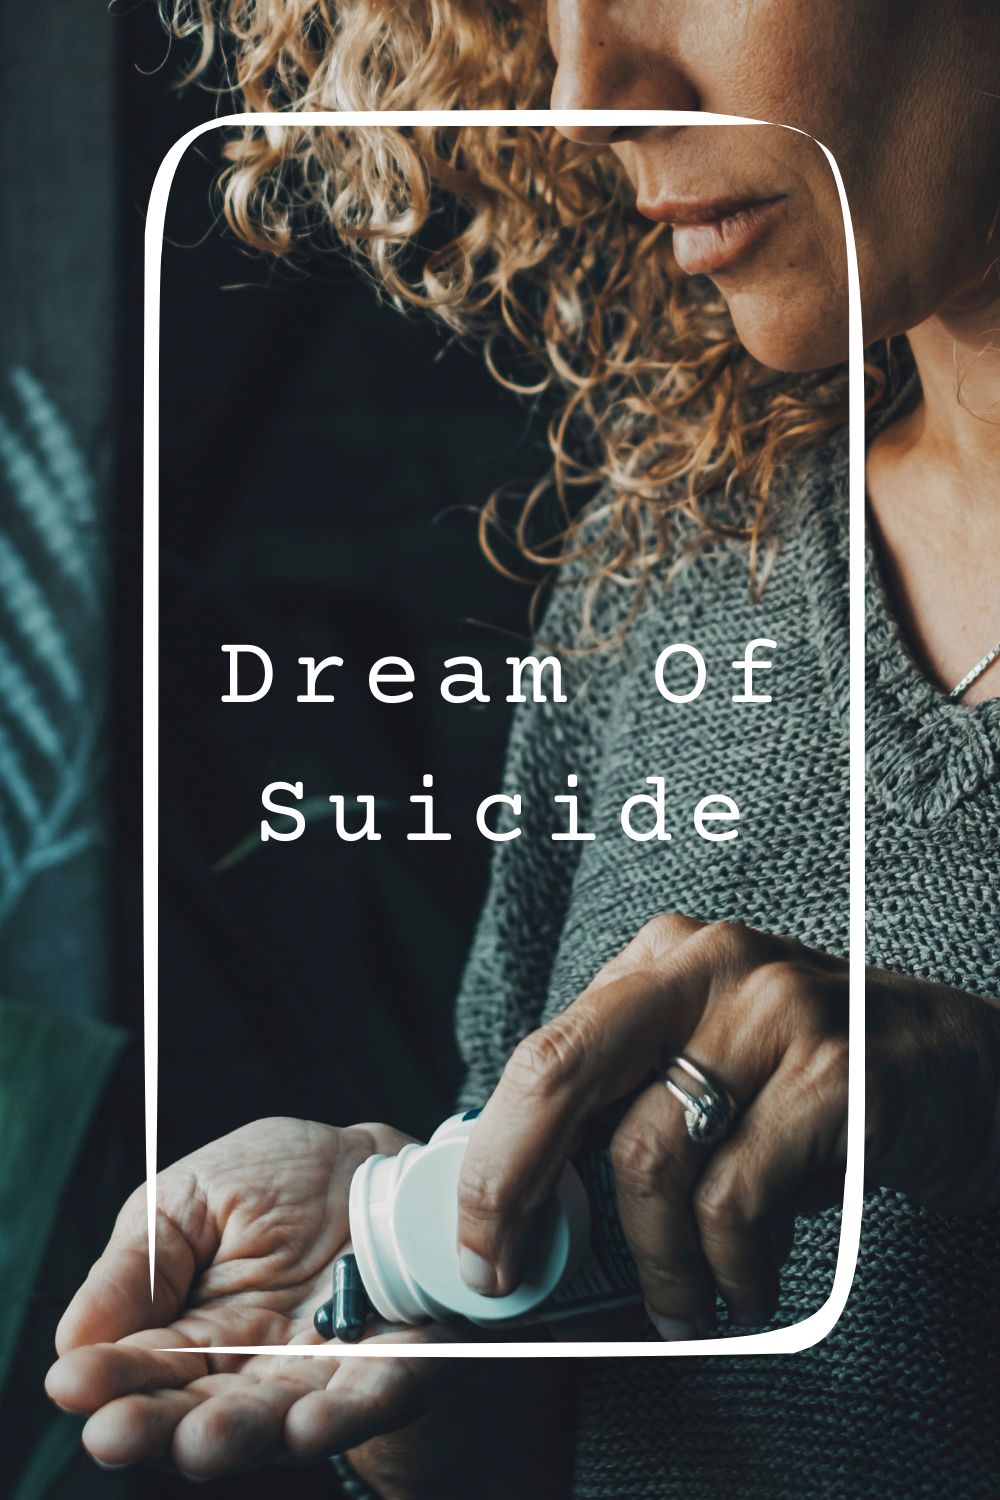 Dream Of Suicide Meanings 2